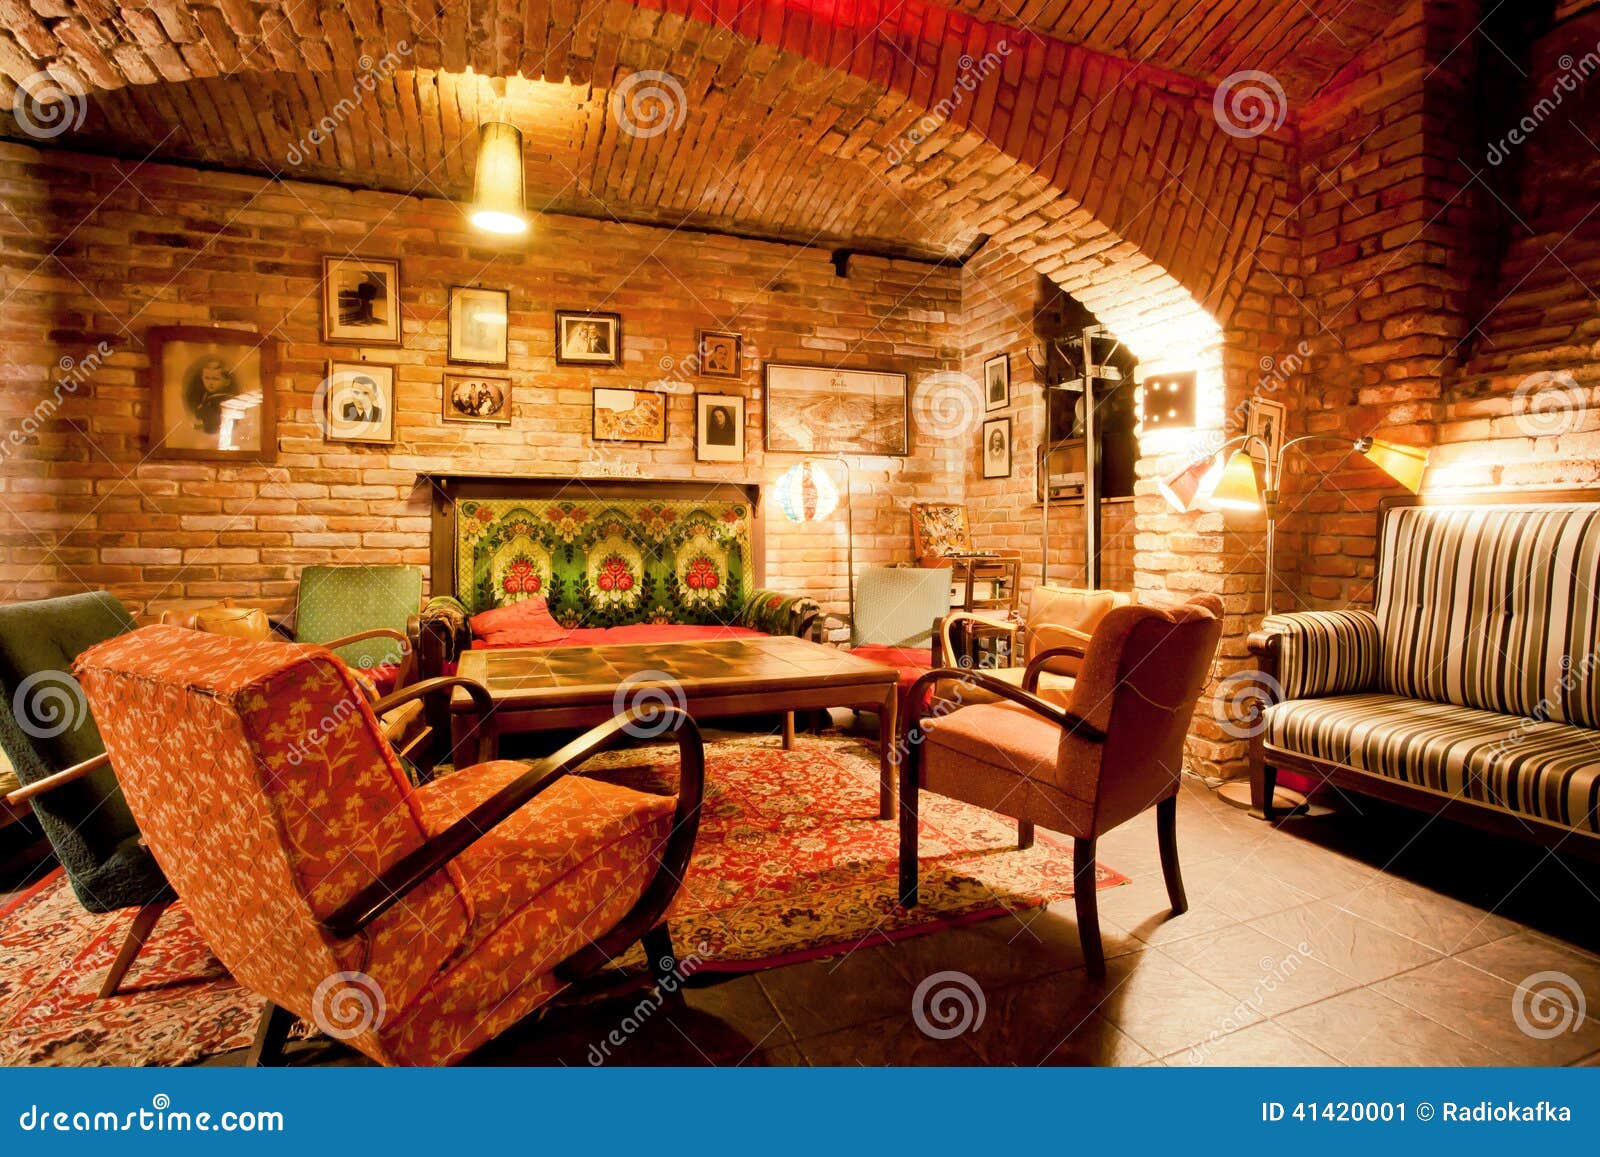 interior cozy cafe style old apartment prague armchairs sofas historical house prague receives more 41420001